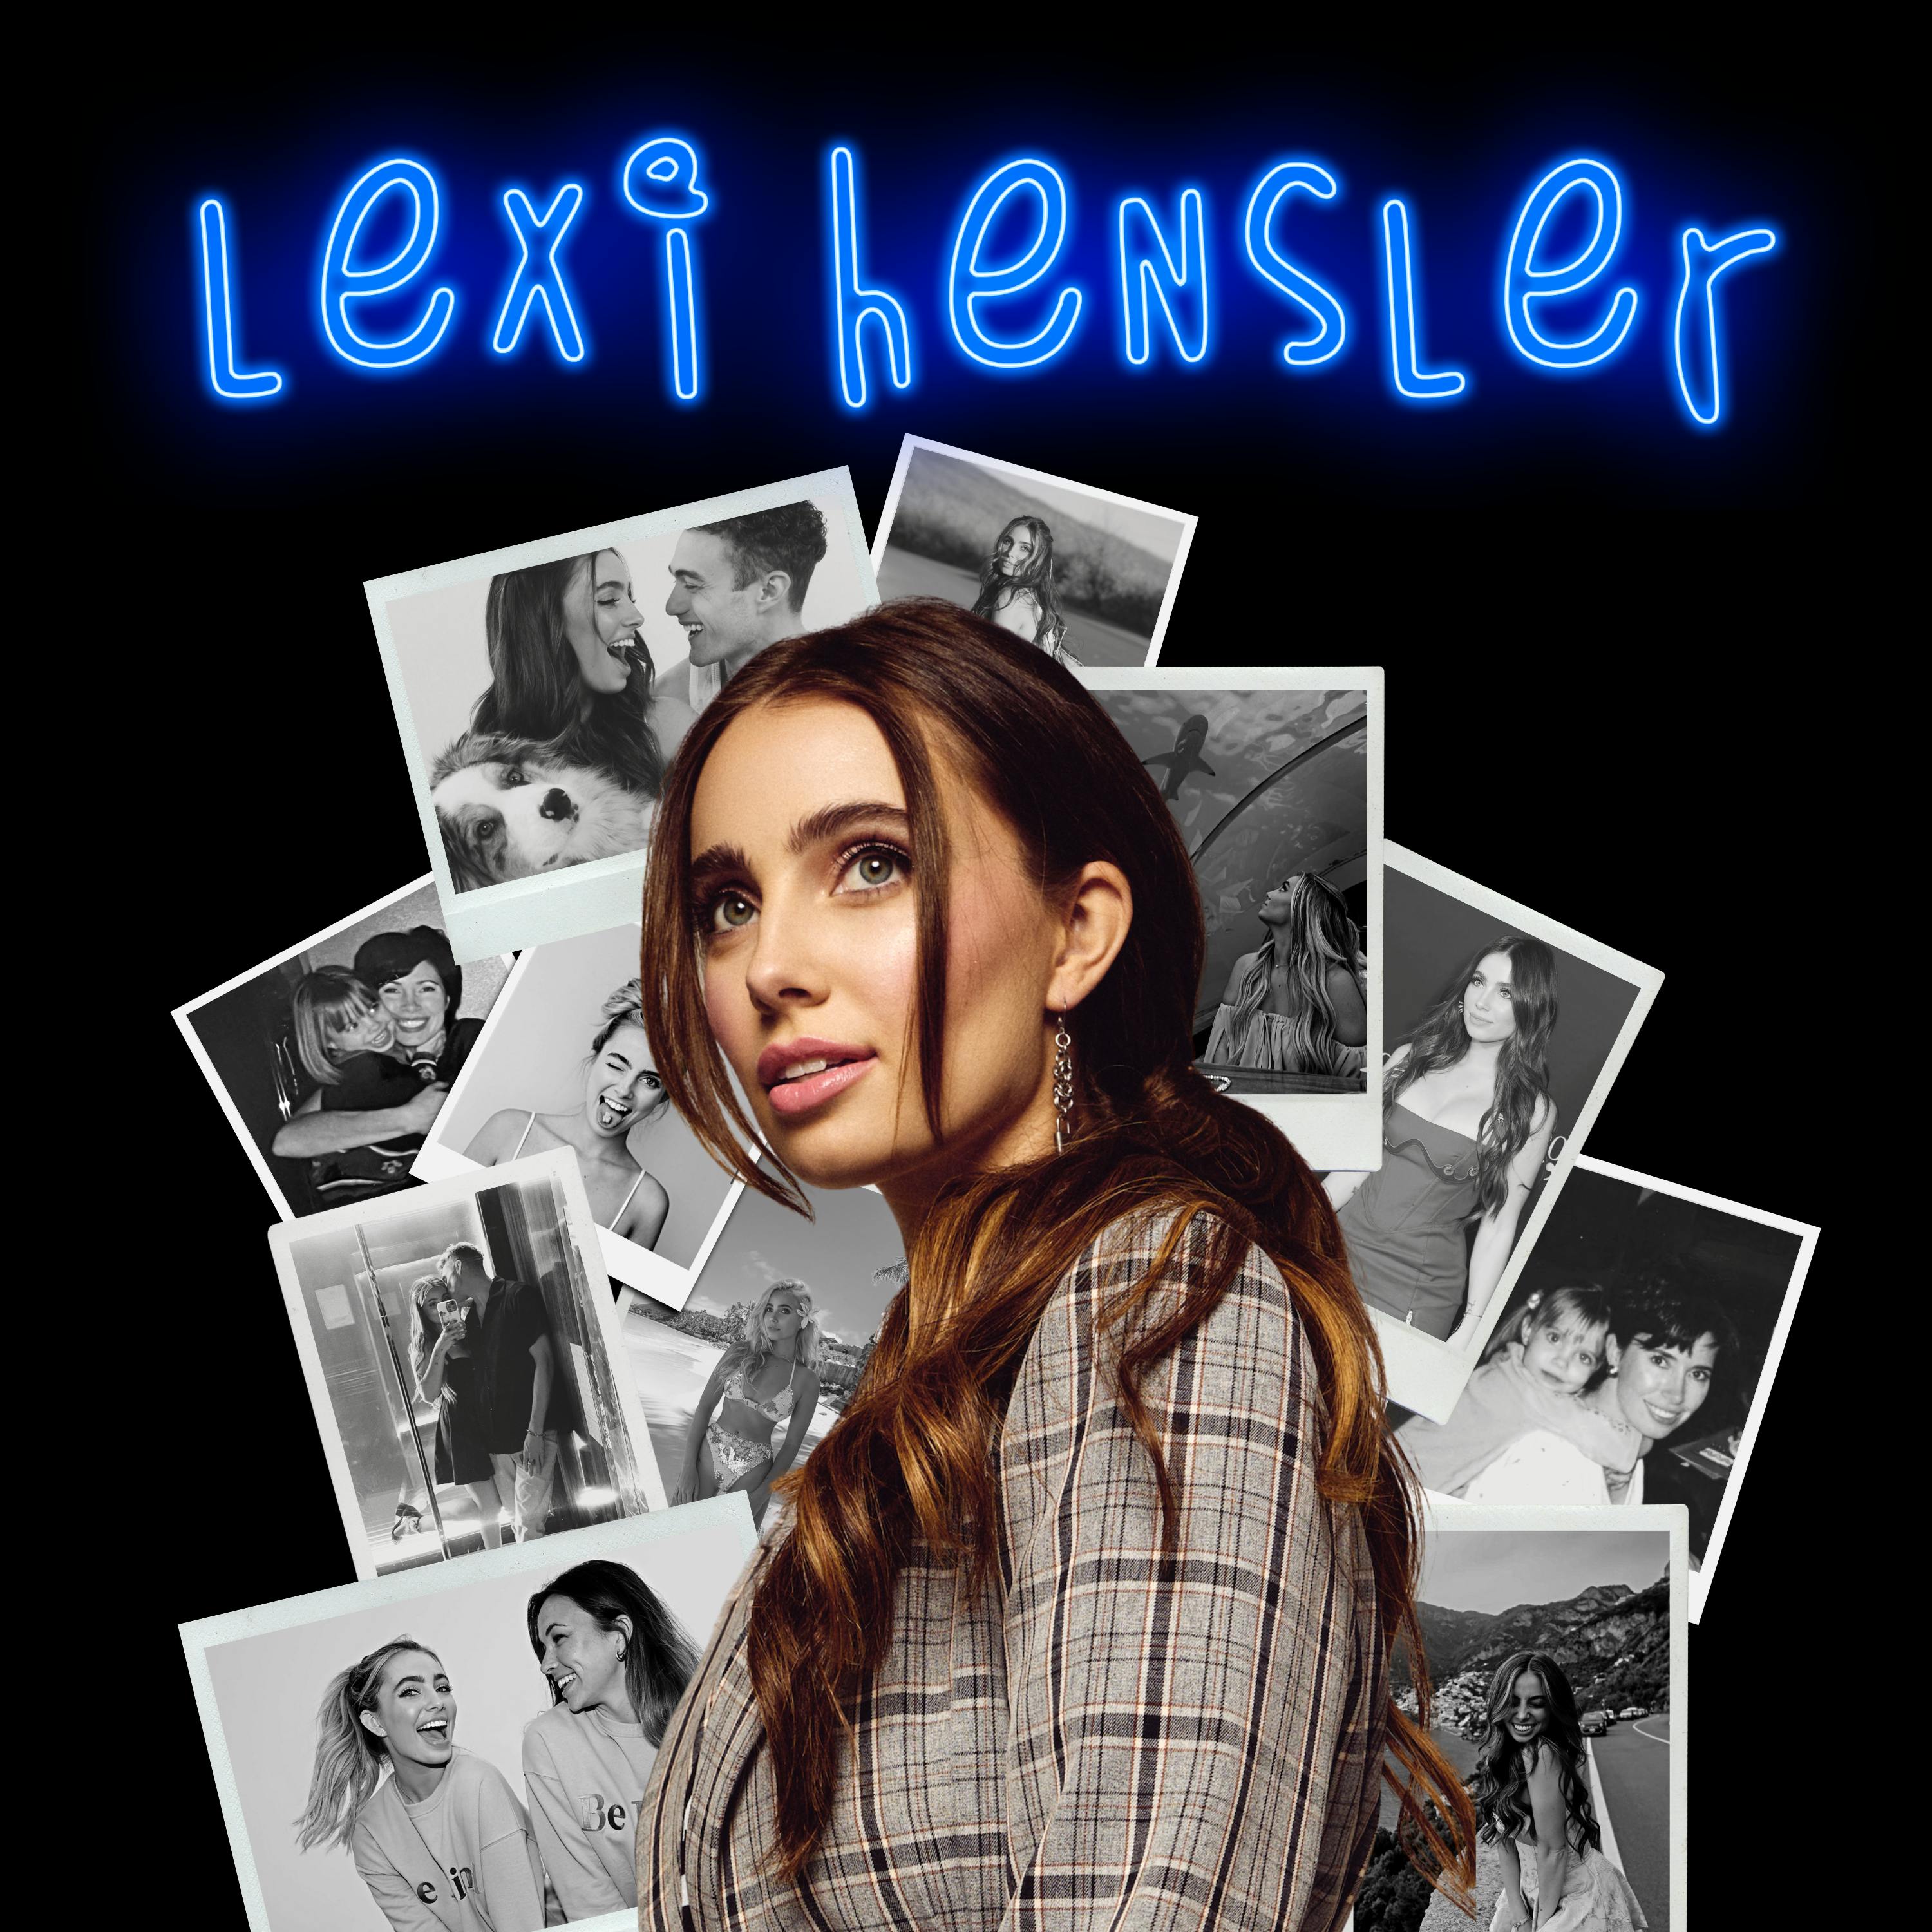 Vulnerable EP76: The Important Lesson TikTok Star Lexi Hensler is Trying to Teach Her Audience